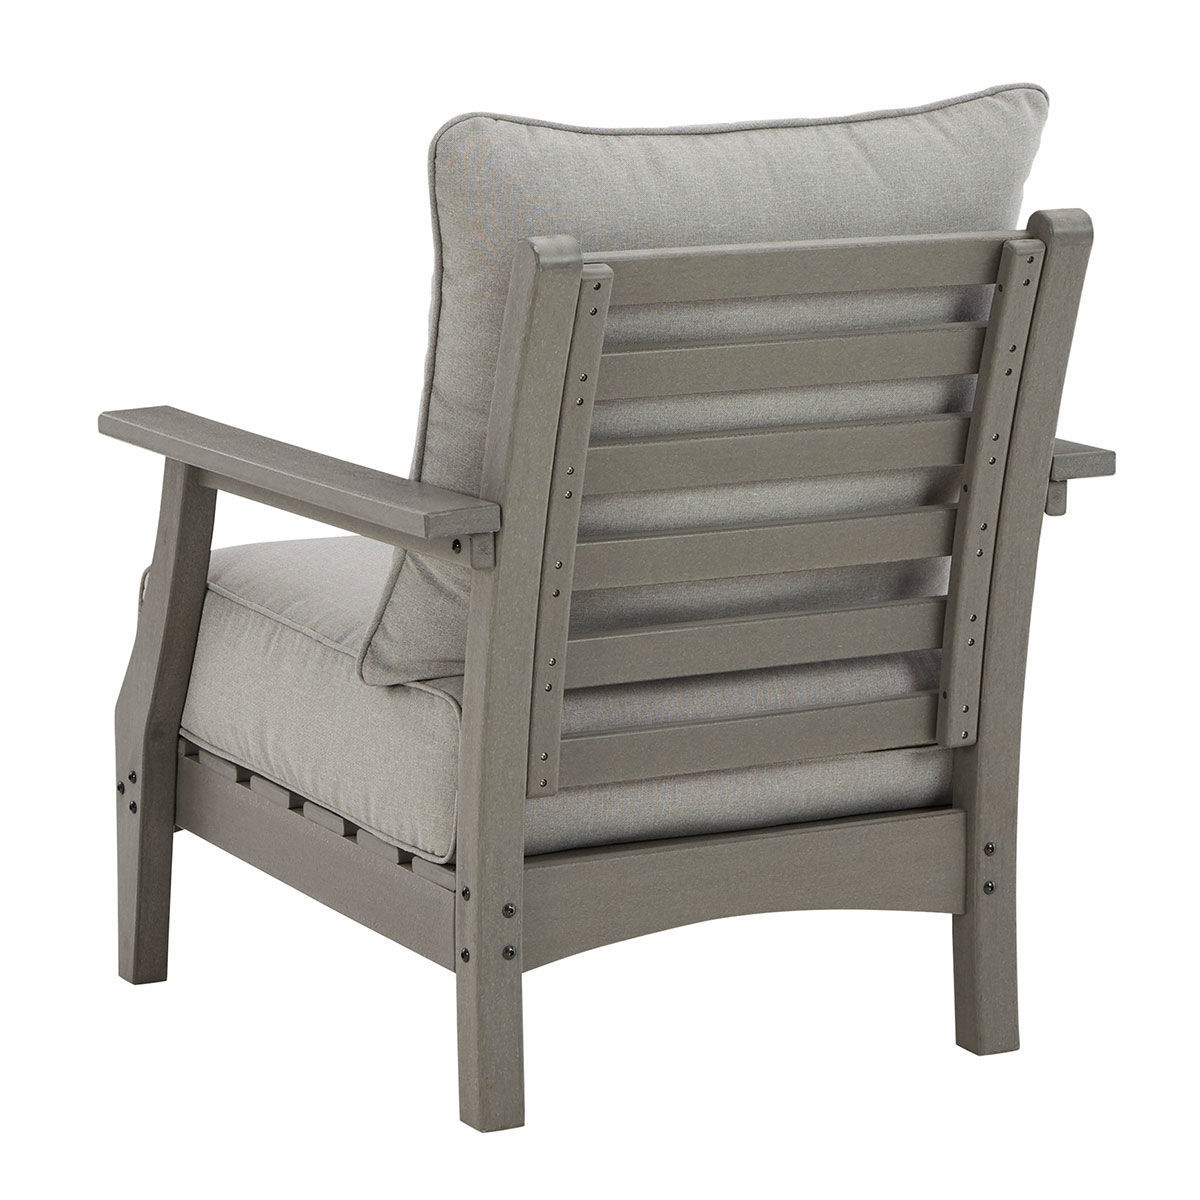 Picture of DESTIN LOUNGE CHAIR PAIR